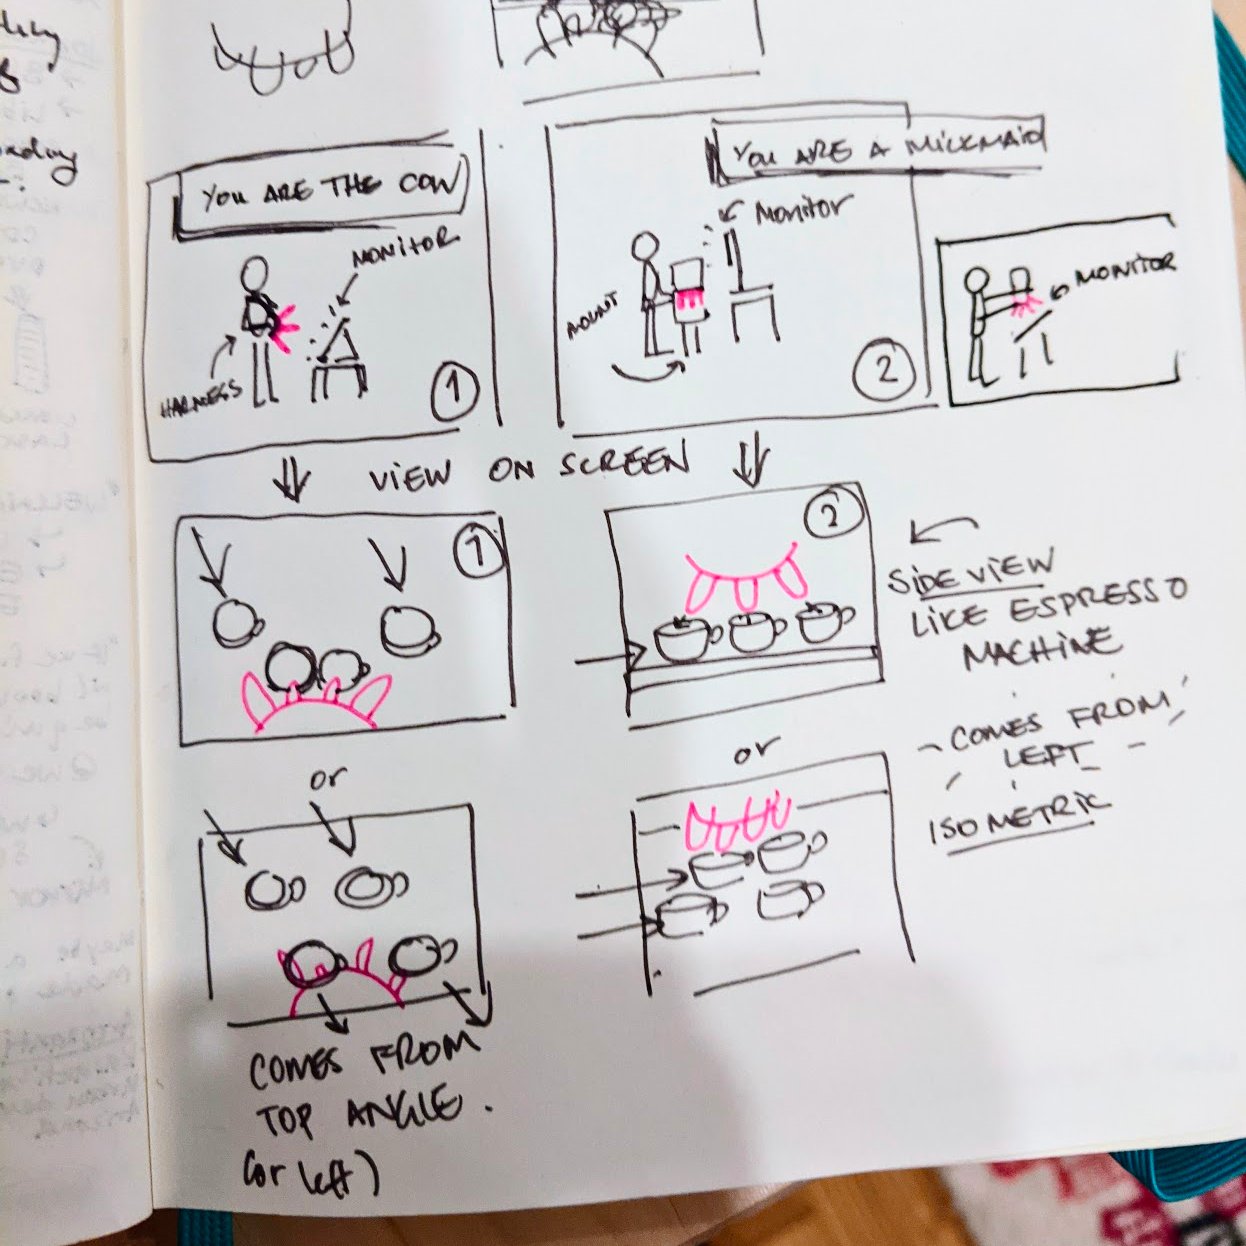 A photo of a sketchbook of sketches of udders in different placements and uses